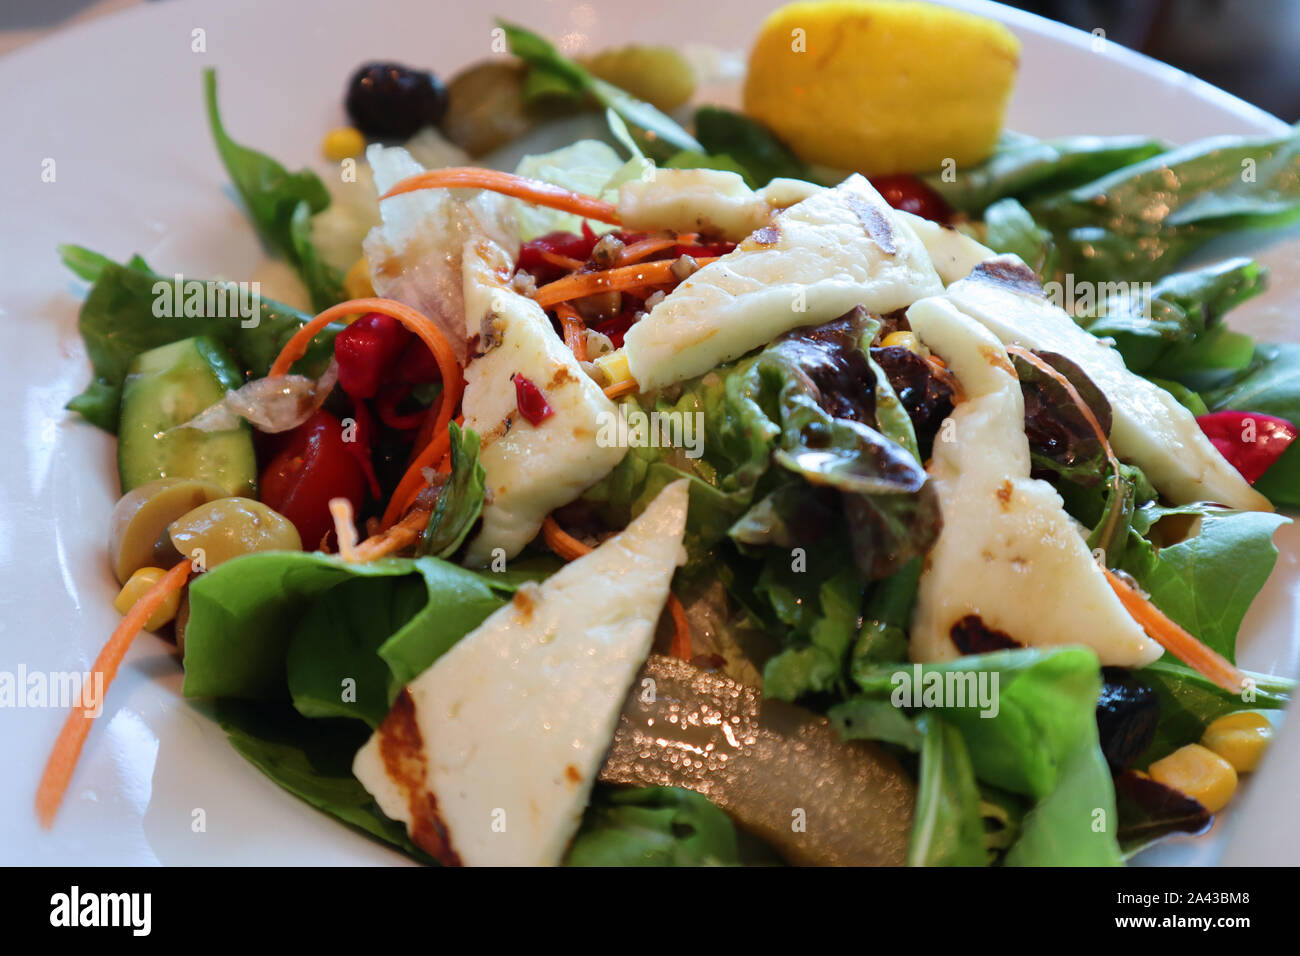 Closeup Vegetarian Salad with White Cheese. Delicious Diet Dinner. Healthy Fresh Food. Stock Photo